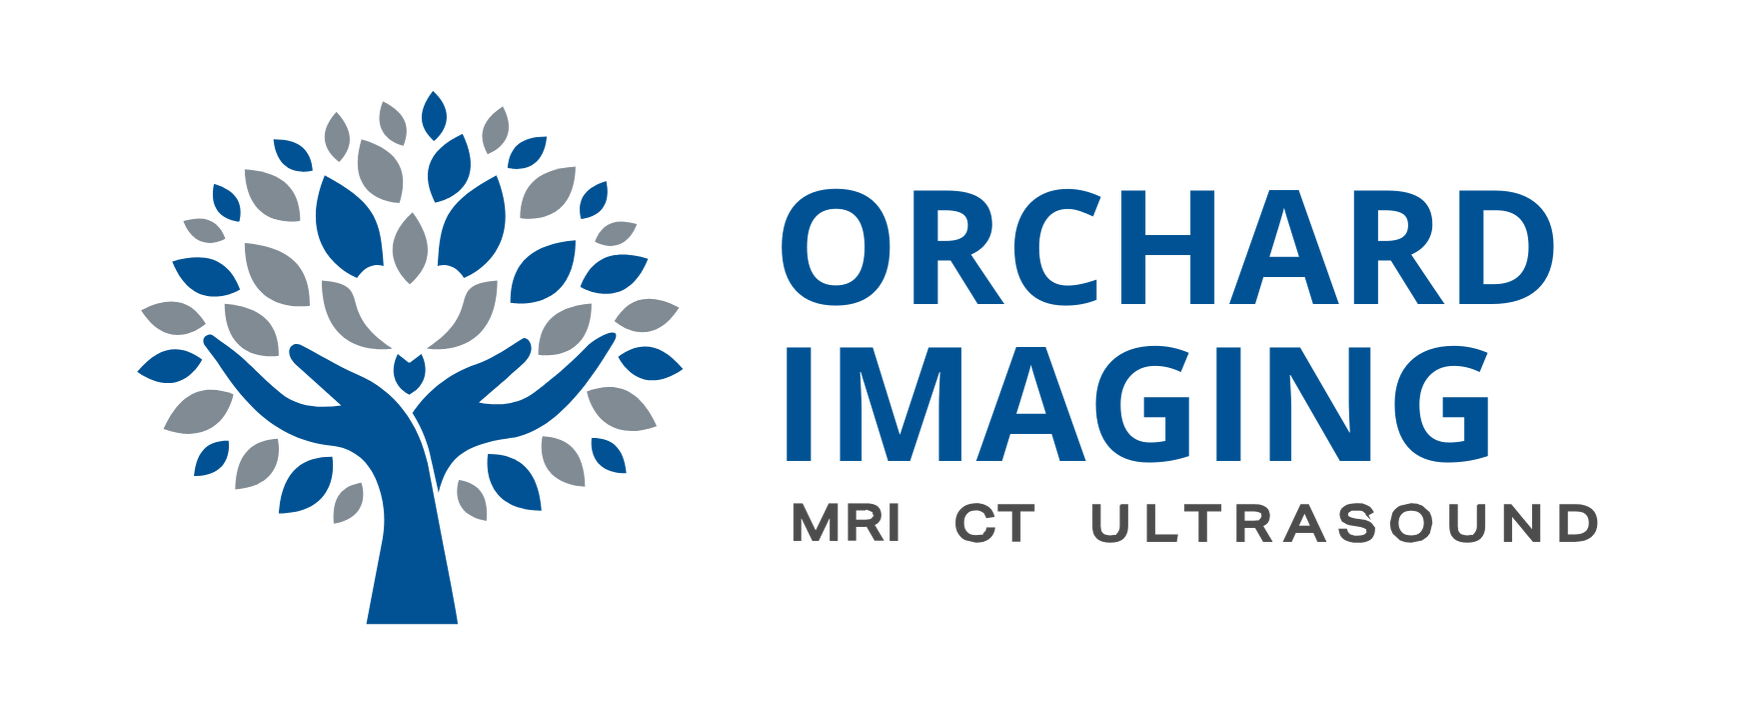 Orchard Imaging